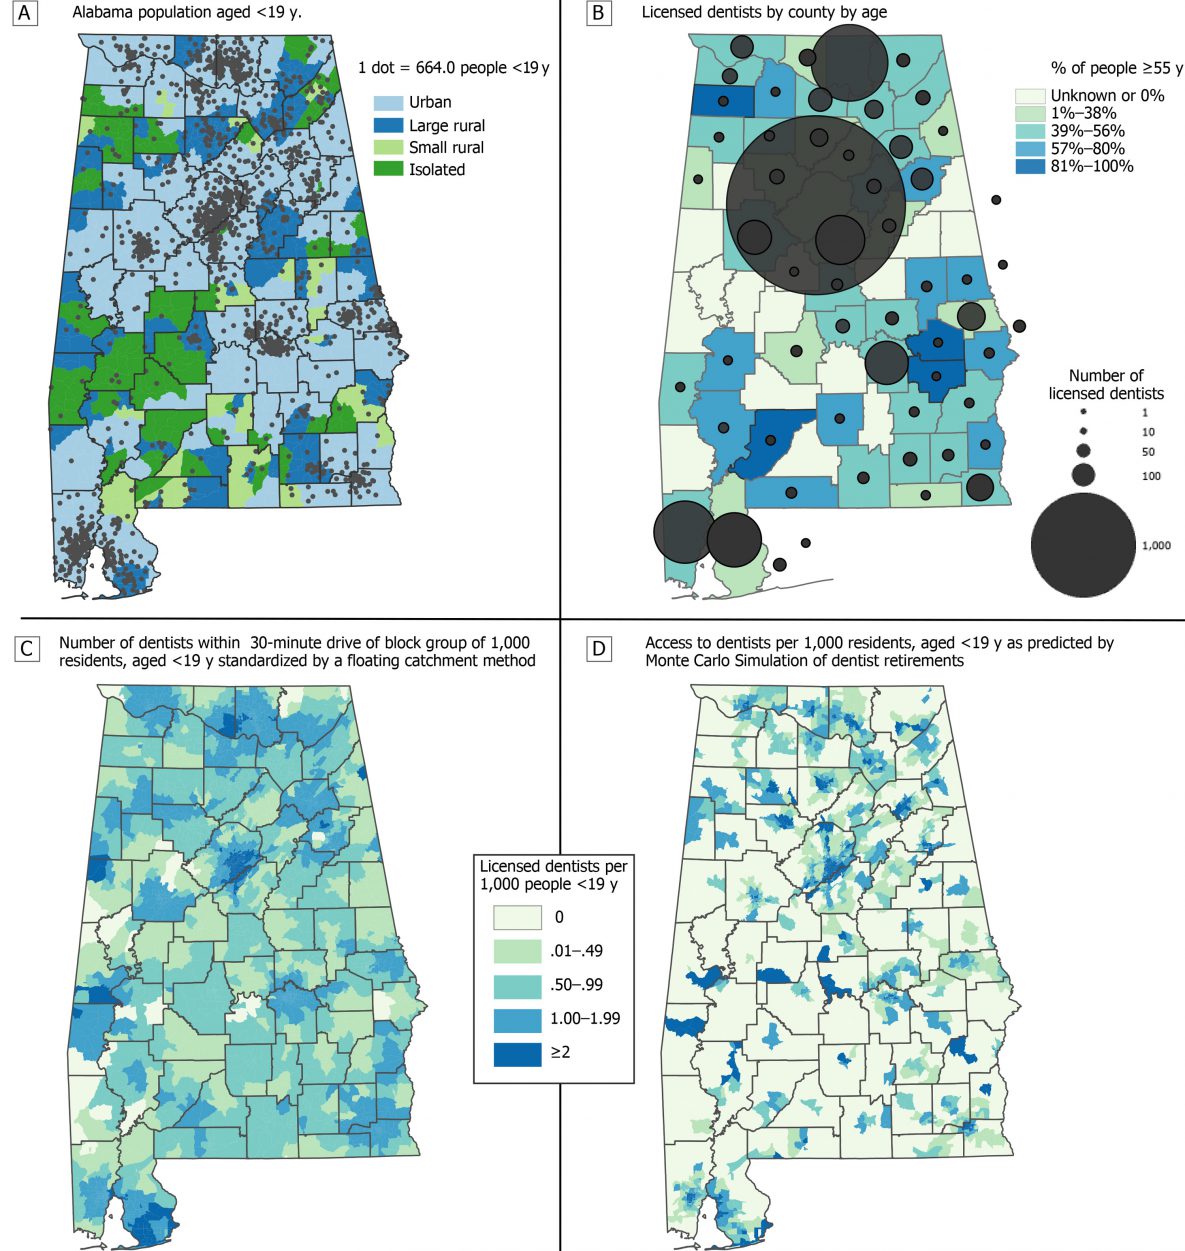 The figure displays a composite of 4 maps highlighting physical access to dentists among youth in Alabama. Map A shows the dispersion of the Alabama population under the age of 21 by using dots where each dot represents 664 youth. This map shows population density is highest in Alabama’s urban areas. Map B shows another overlay map highlighting the dispersion of licensed dentists by age at the county level using proportional dots and the percentage of licensed dentists within each Alabama county aged 55 years and younger. Information related to counties with less than 3 dental providers is not displayed. Maps suggest that most of the state’s licensed dentists practice in urban counties, and the proportion of dentists aged 55 and older appear to be higher in rural areas. Map C shows the number of dentists accessible within 30 minutes to a block group of 1,000 young residents. Many urban areas of Alabama appear to have at least one dentist per 1,000 youth, and most rural areas have less than one dentist per 1,000 young people. Map C also displays some low population rural areas in West Alabama where there are more than one dentist per 1,000 young people. Map D represents physical access to dentists per 1,000 young residents if dentists were to retire according to a simulated model. Urban areas appear to be less affected, compared with rural areas if dentists retire based on age. The areas displaying little to no access in Map D serve as areas to target for recruitment of dentists if dentists entering practices in those areas becomes low.